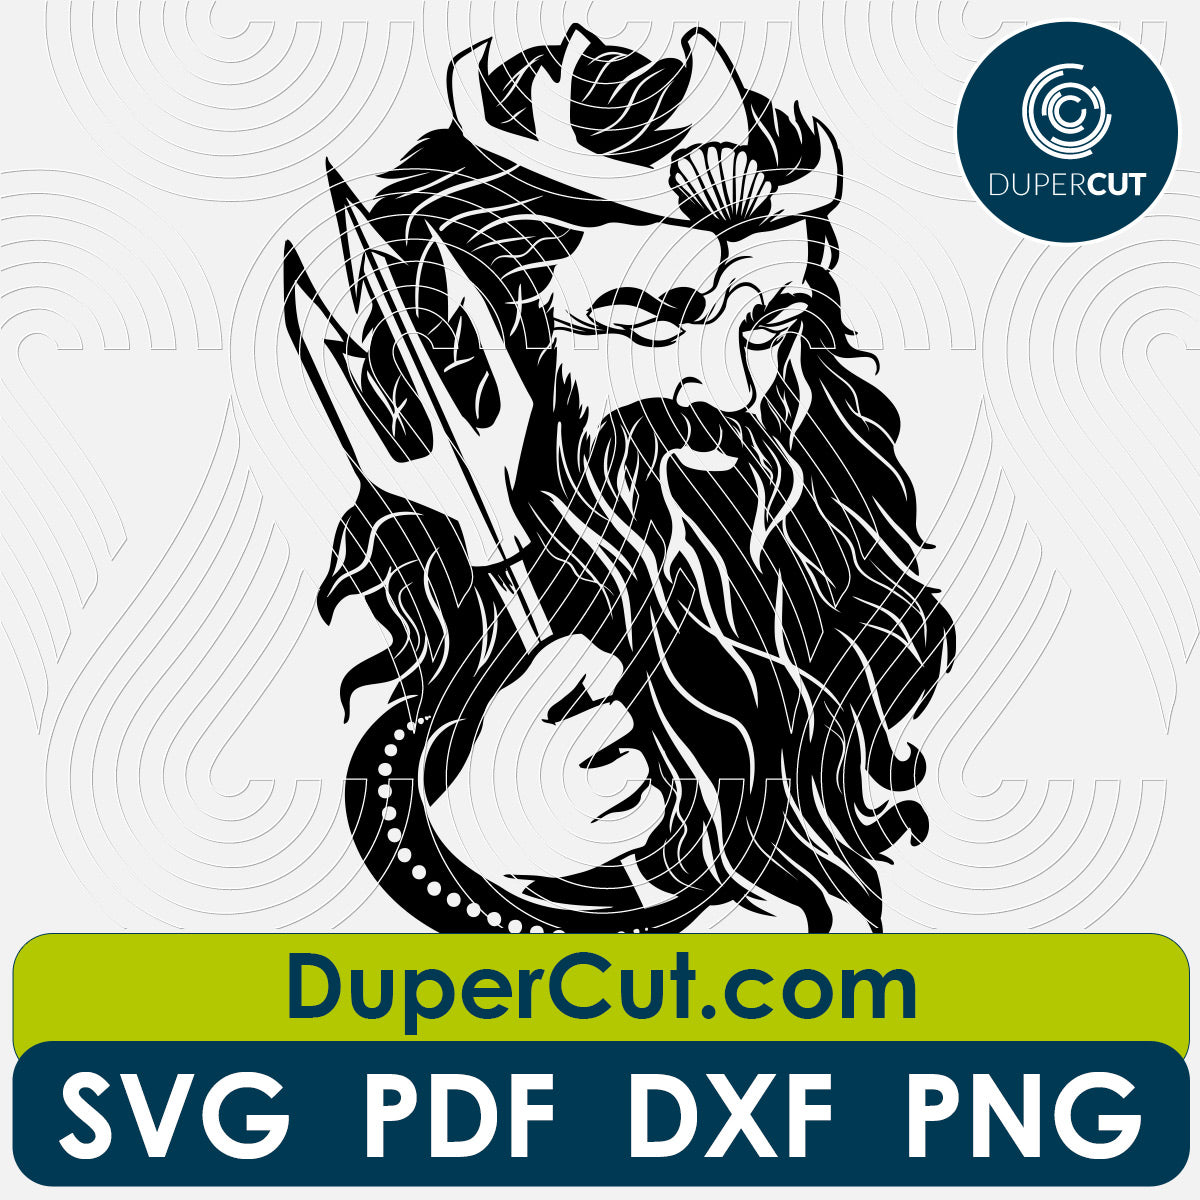 Poseidon Naptune king - SVG DXF vector files for cutting and engraving by DuperCut.com